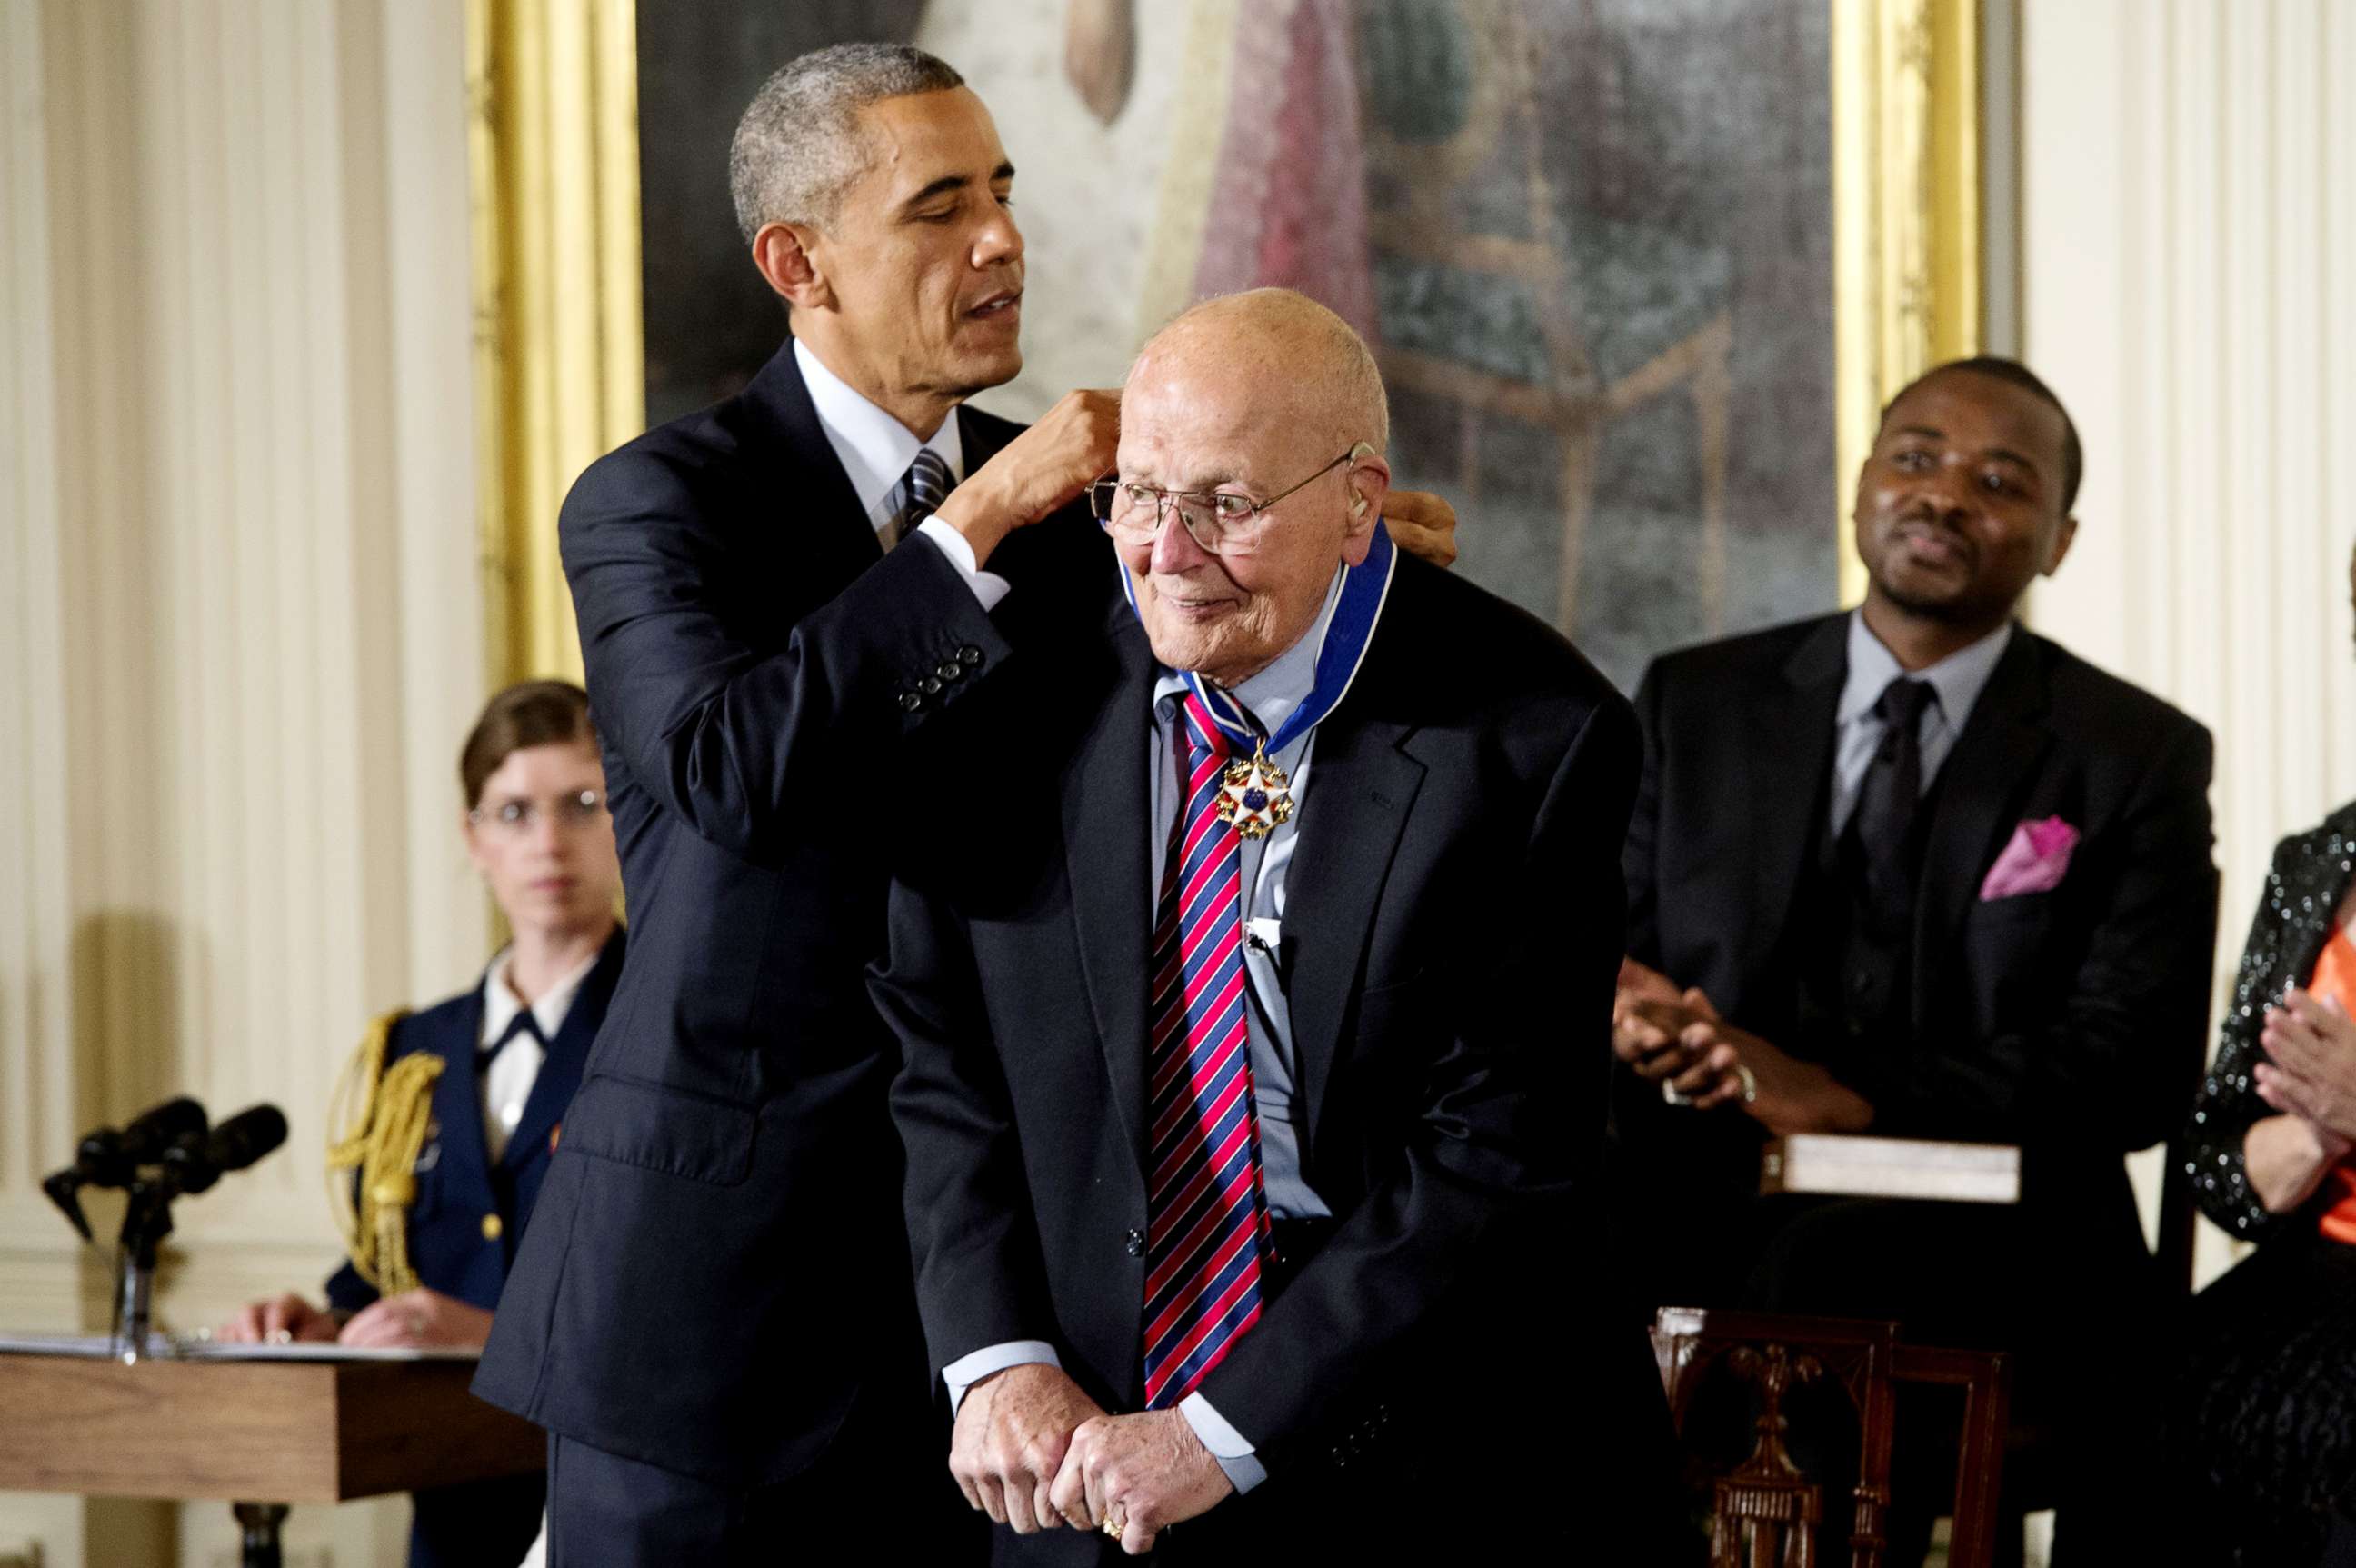 PHOTO: John Dingell, the longest serving Member of Congress in US history, is awarded the Presidential Medal of Freedom by US President Barack Obama, left, during a ceremony in the East Room of the White House, Nov. 24, 2014.